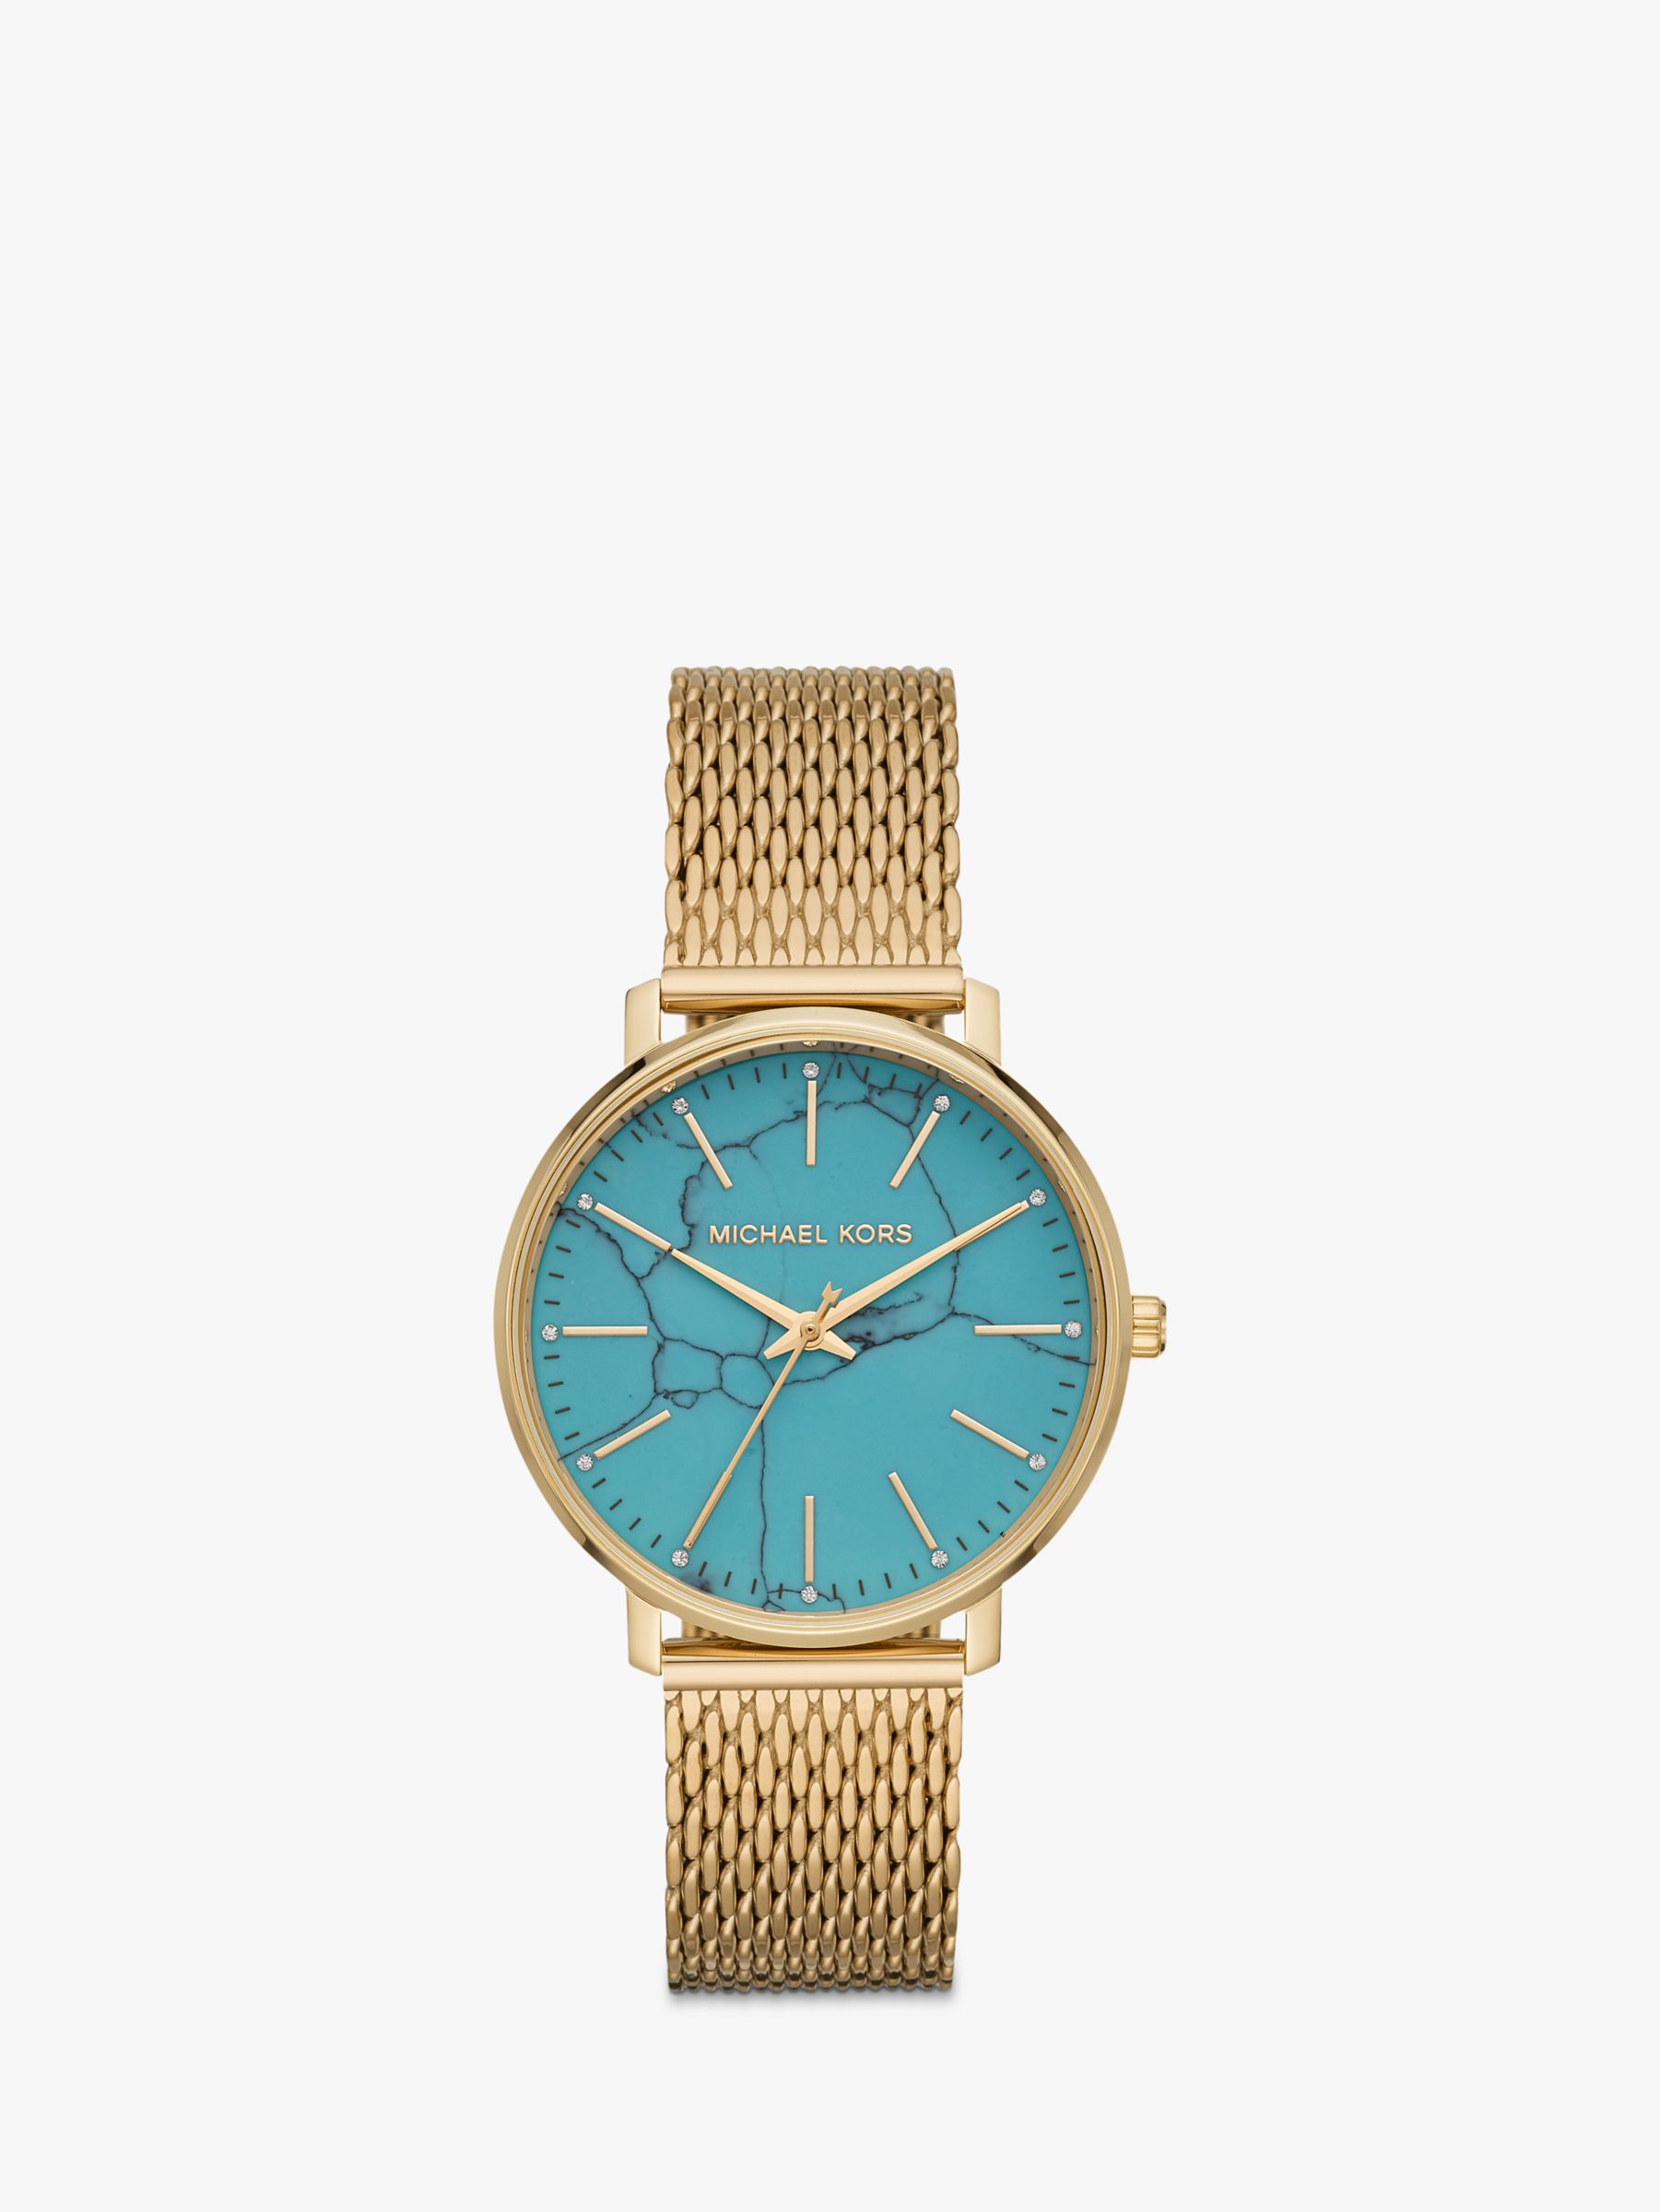 michael kors turquoise face watch